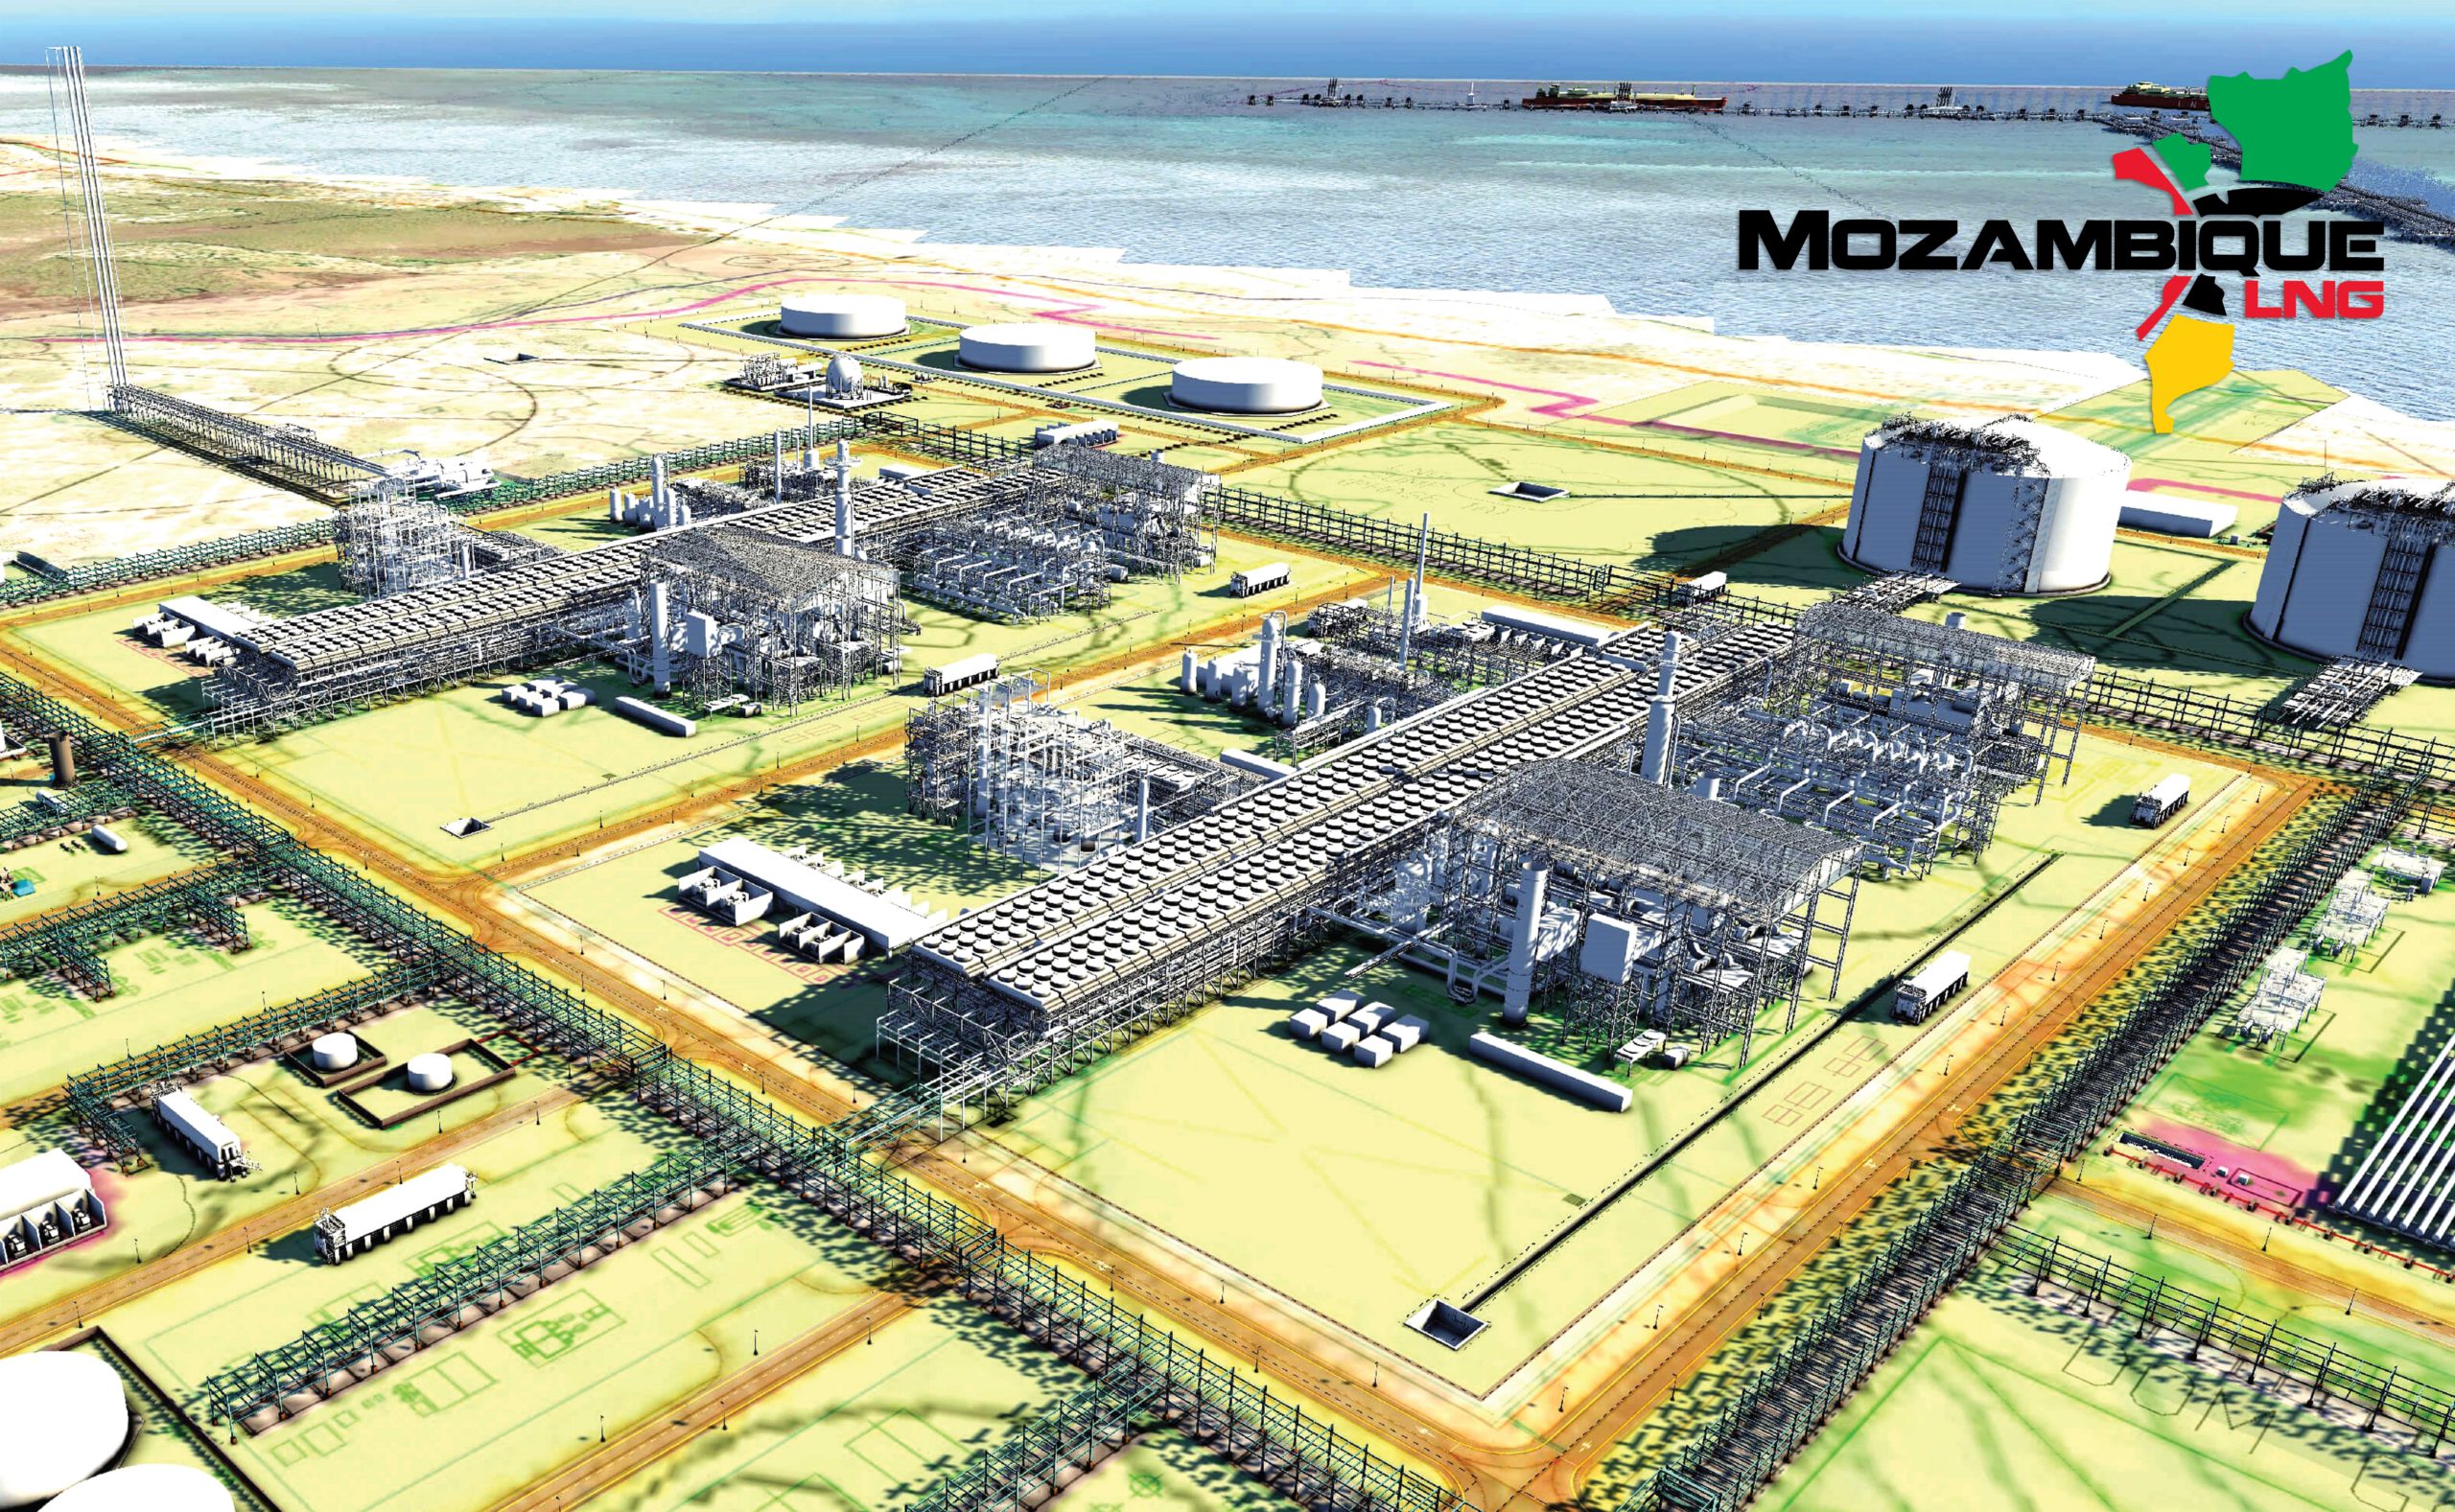 Mozambique LNG Scaled 